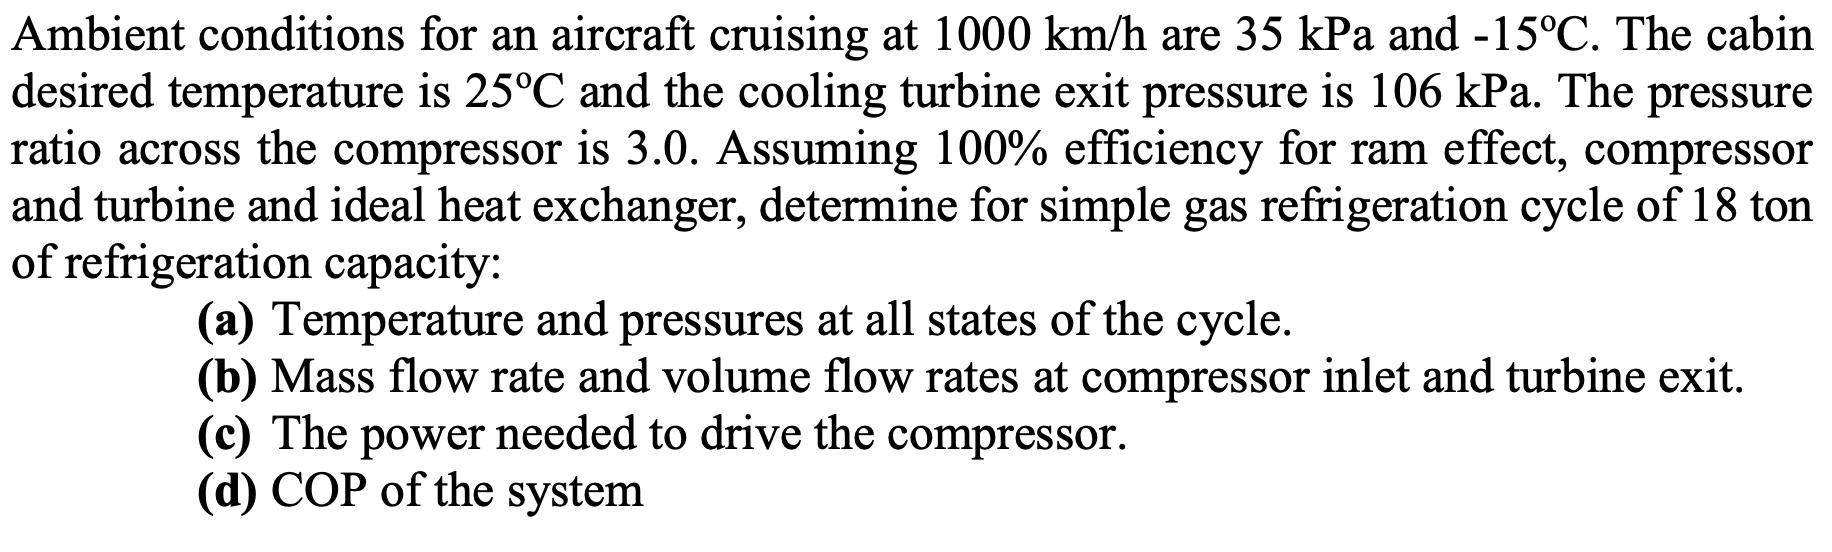 Ambient conditions for an aircraft cruising at 1000 km/h are 35 kPa and -15C. The cabin desired temperature